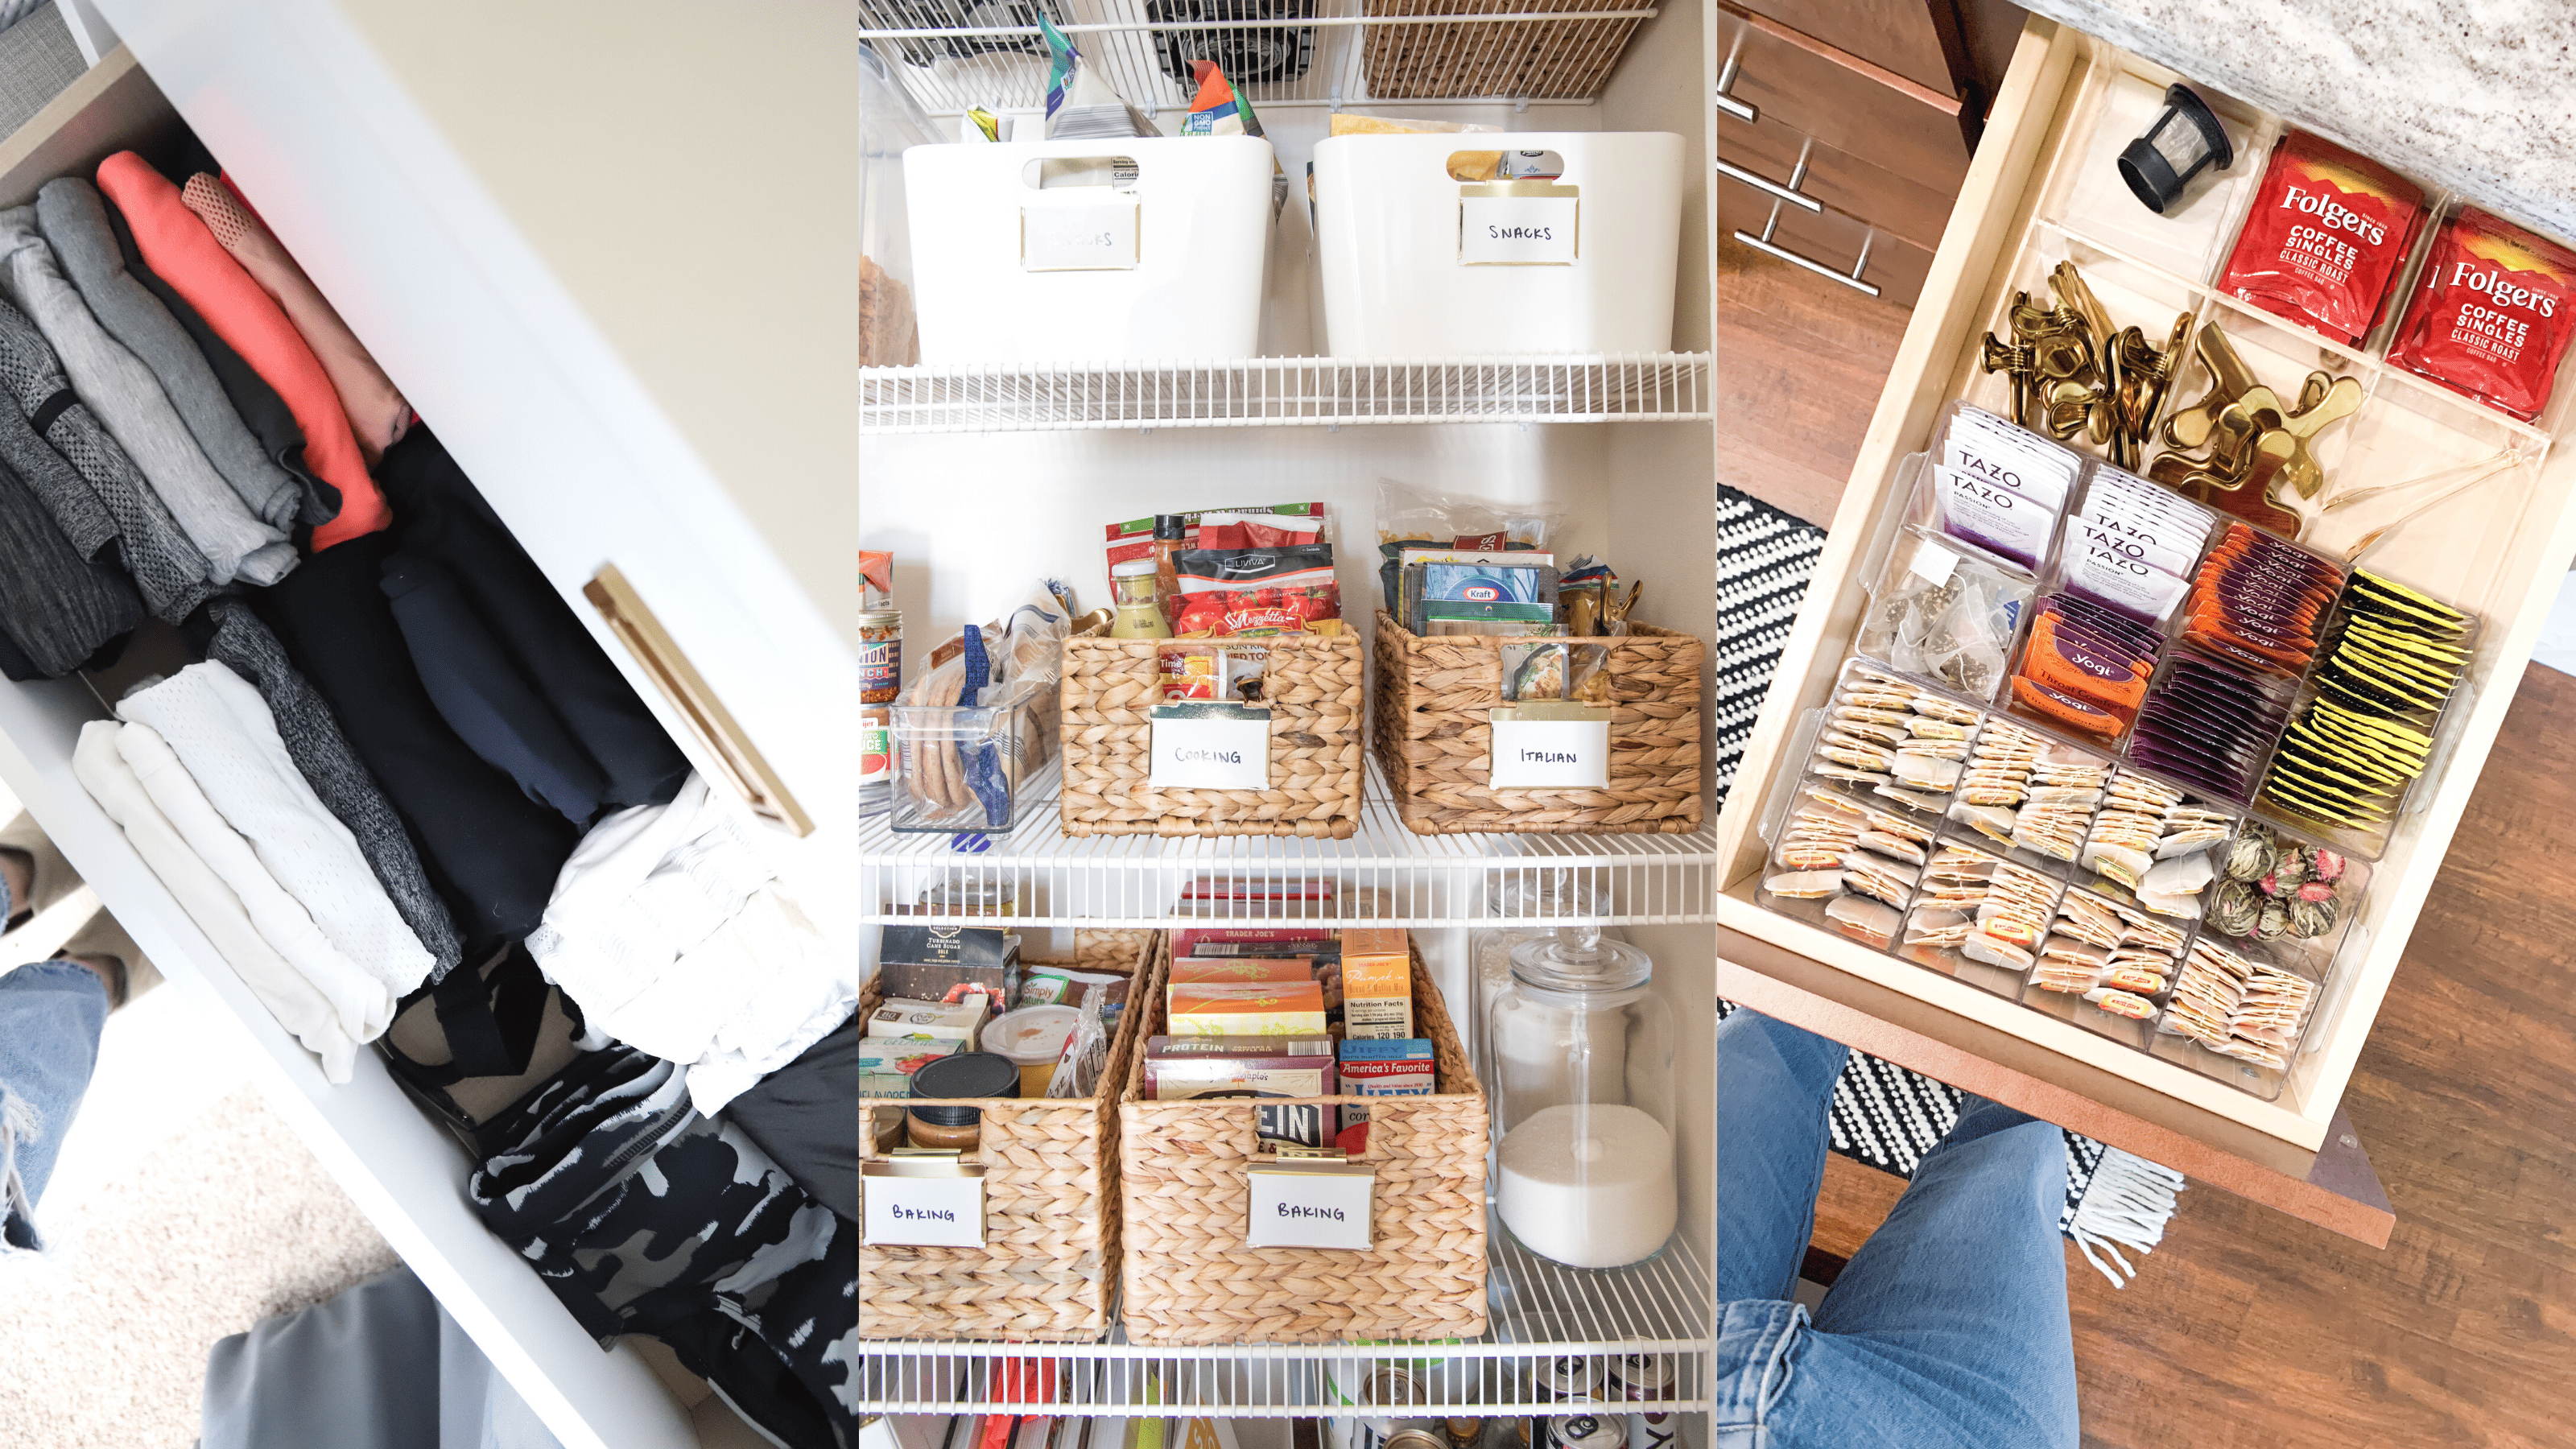 Get Your Home Insanely Tidy With These 18 Storage Organization Ideas - By  Sophia Lee